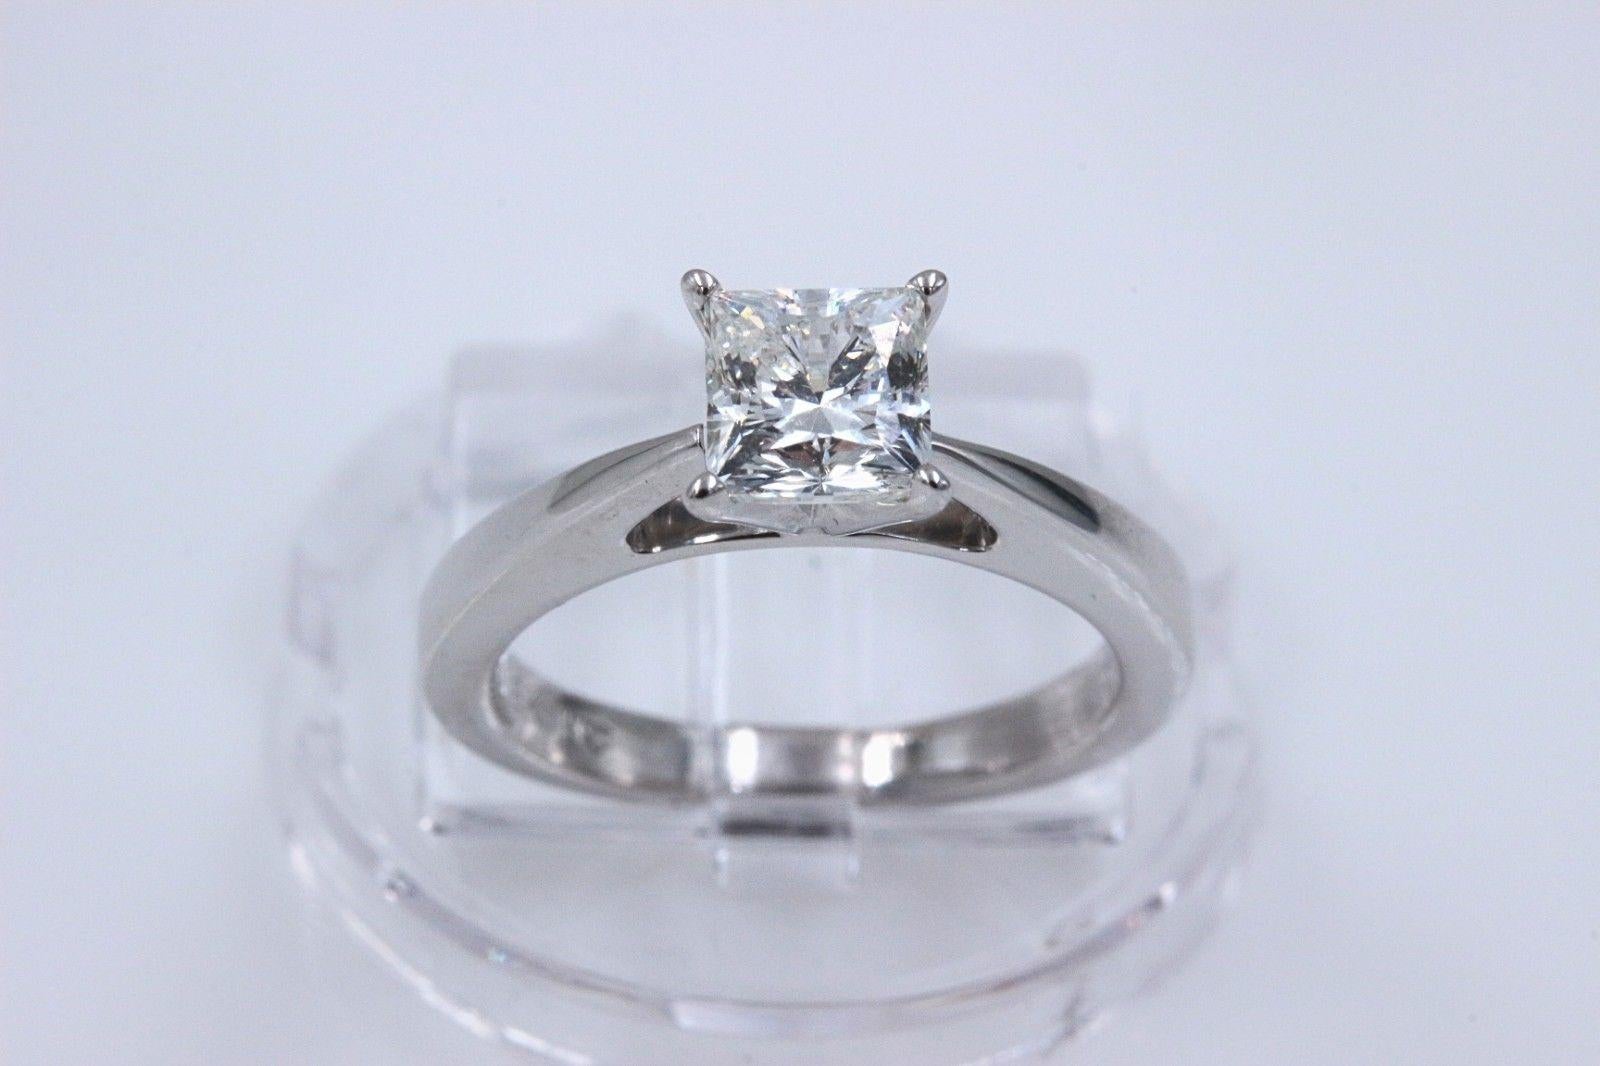 CELEBRATION DIAMOND
Style:  Solitaire Diamond Engagement Ring
Serial Number:  CEL567131
Metal:  18K White Gold
Size:  6 - sizable
Total Carat Weight:  1.09 cts
Diamond Shape:  Princess - Modified Square Brilliant
Diamond Color & Clarity:  H color,